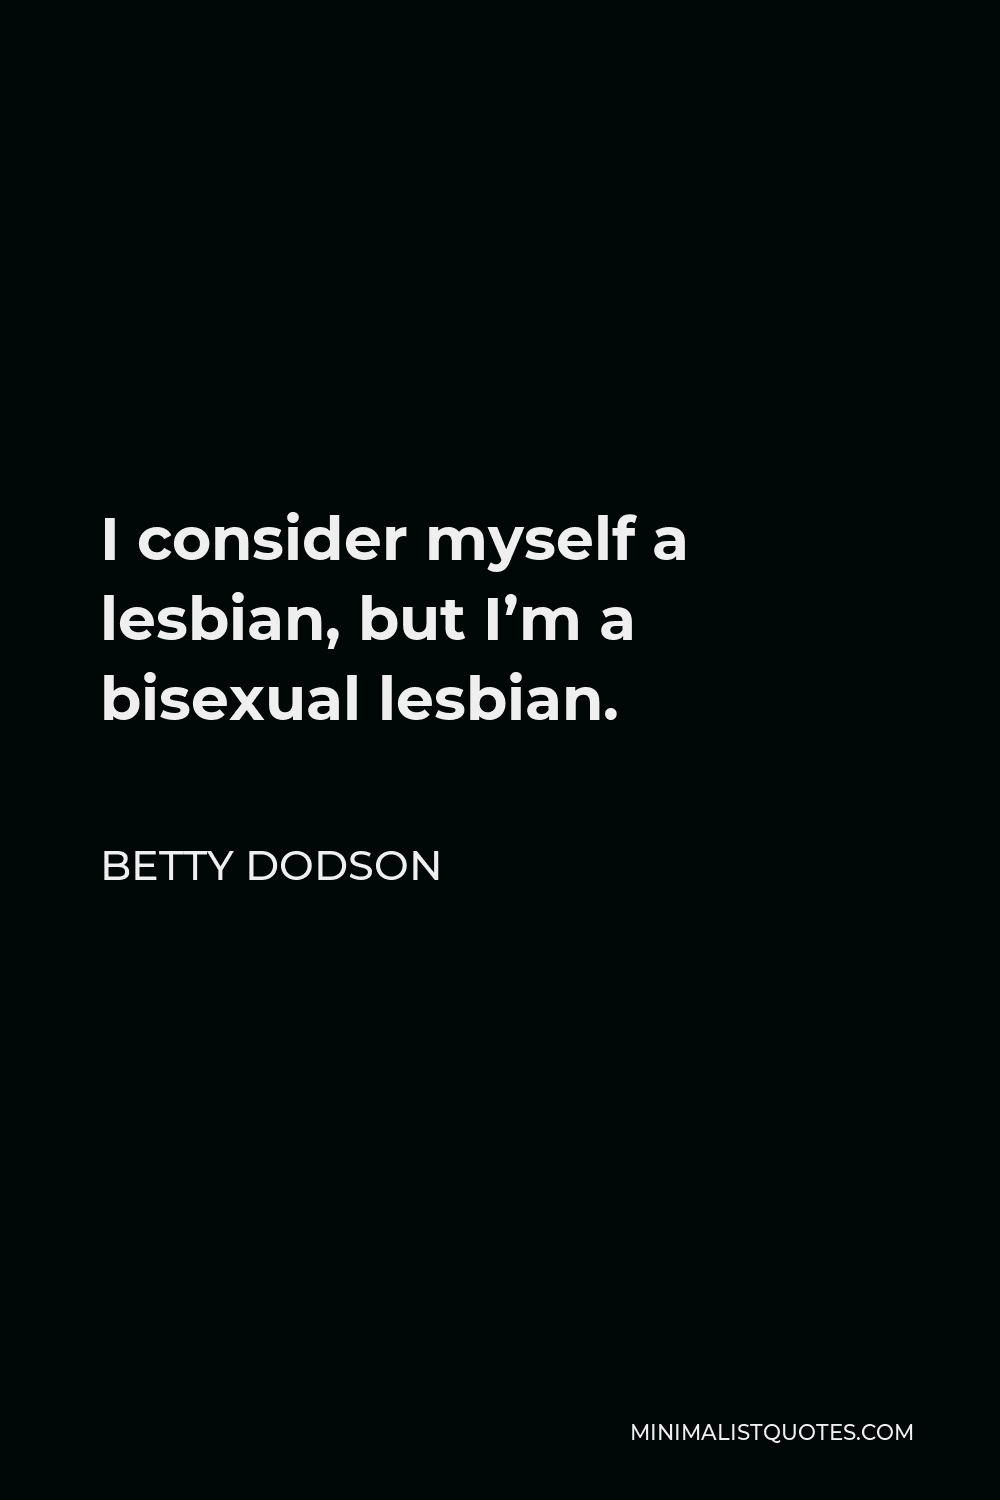 Betty Dodson Quote - I consider myself a lesbian, but I’m a bisexual lesbian.